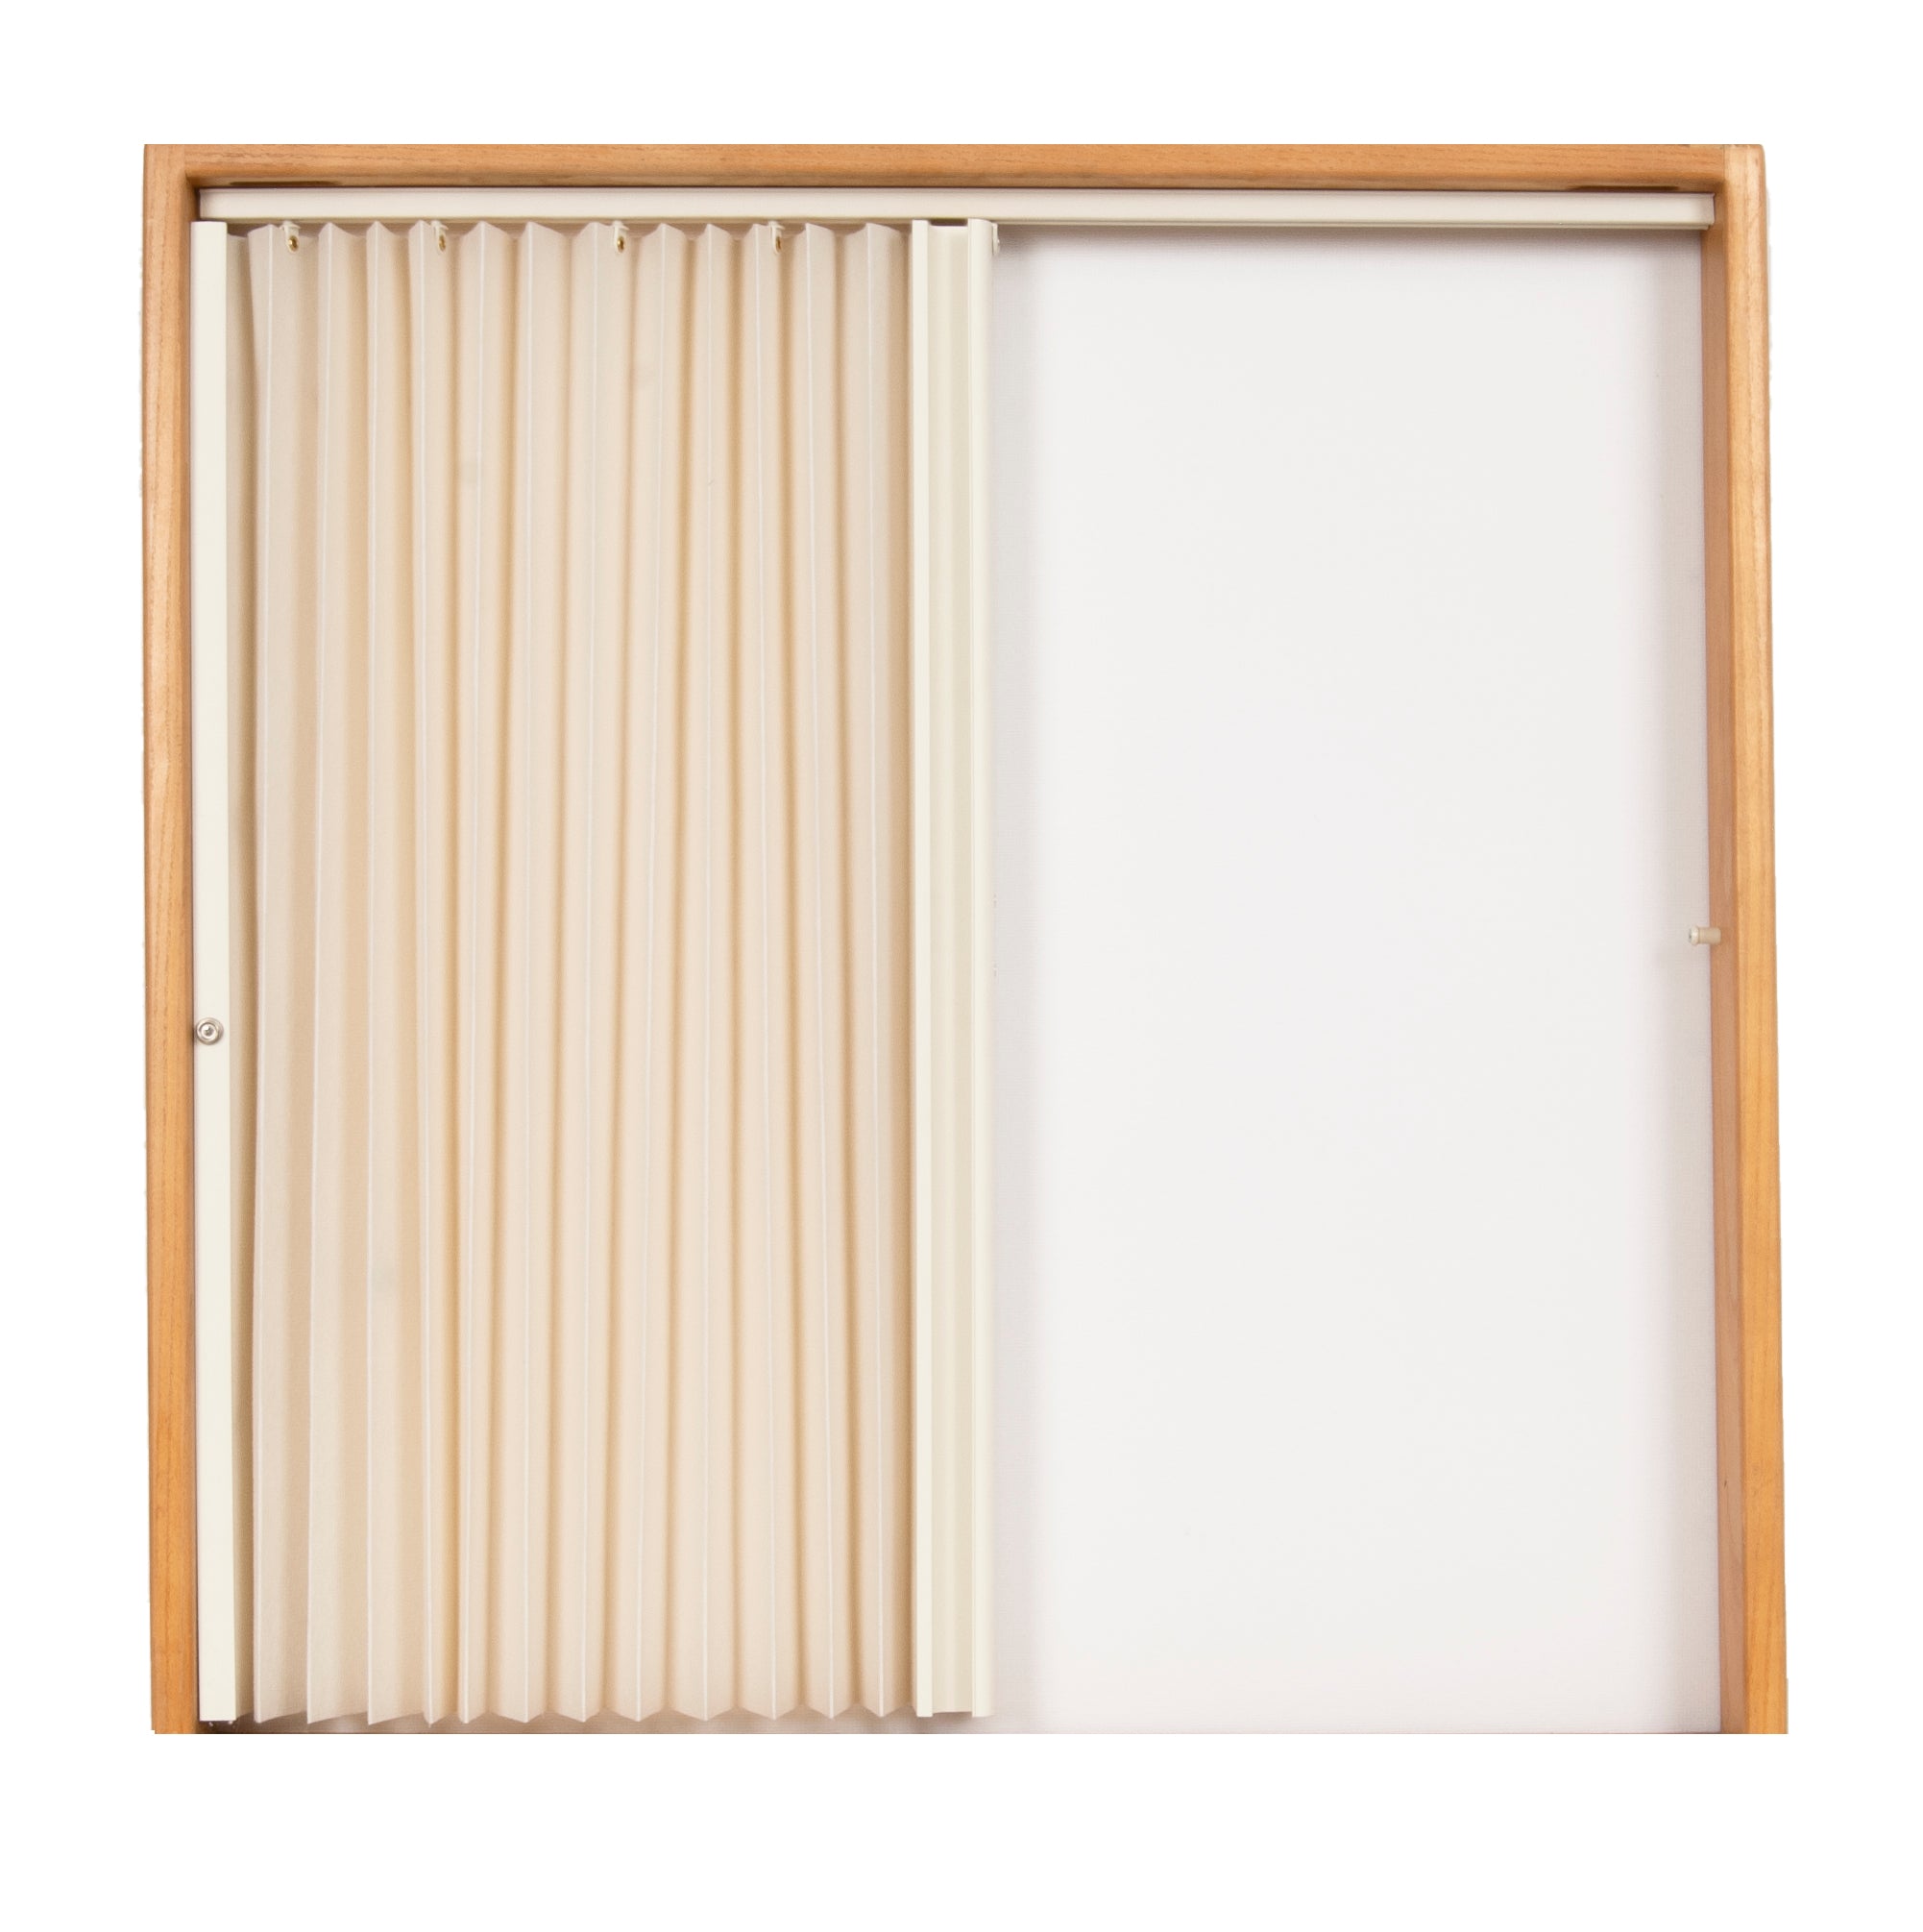 Pleated Accordion Doors - Alabaster w/Ivory Rail and Ivory track